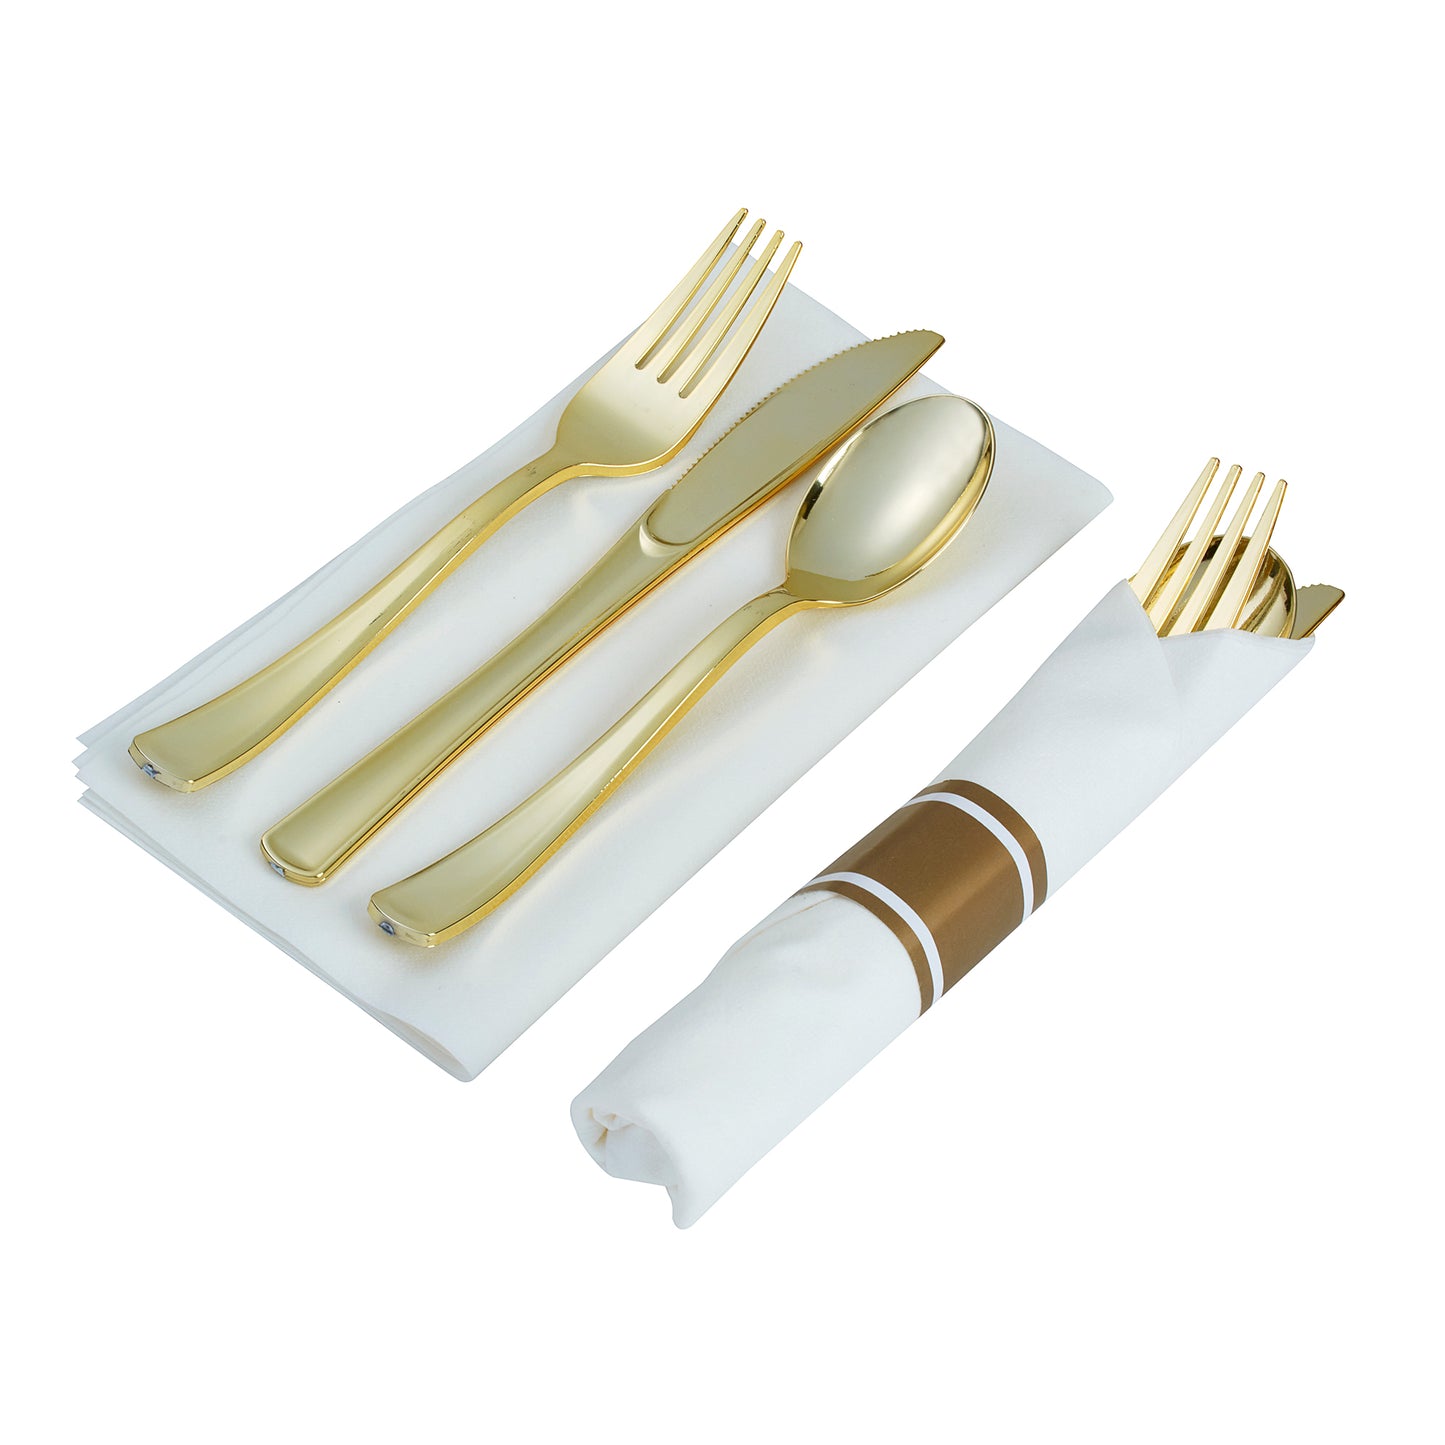 300-piece Gold Dinnerware Set for 50 guests Includes: 100 gold rim plastic plates & 50 pre-wrapped gold silverware sets